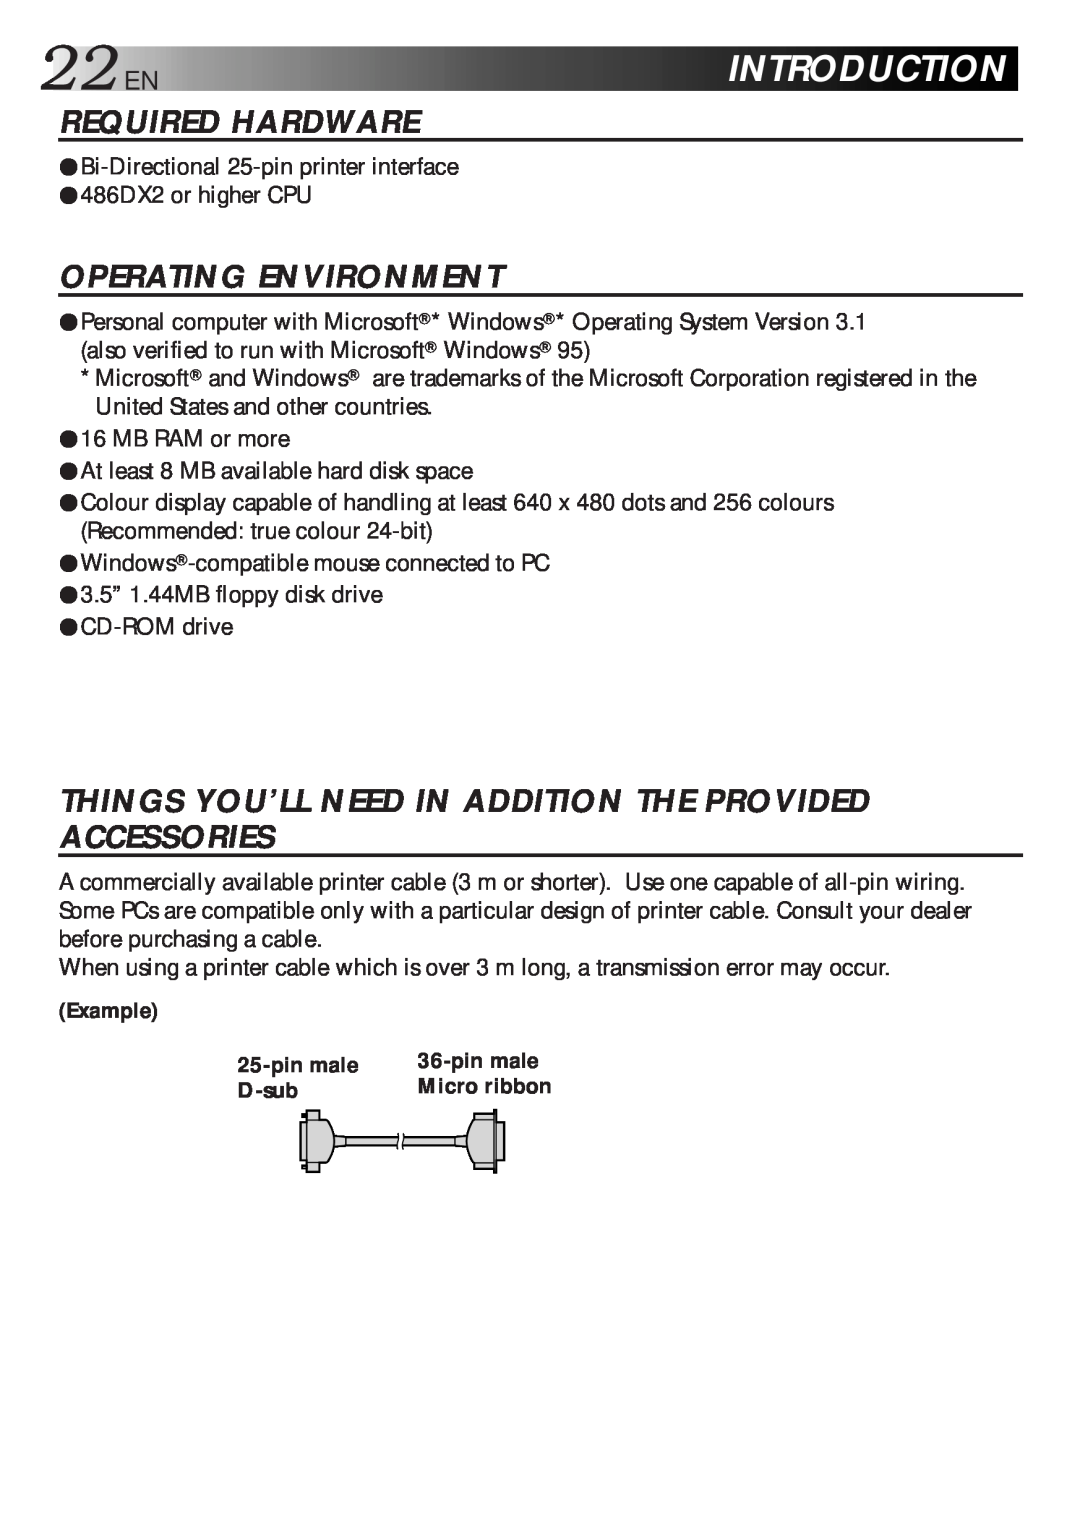 JVC GV-DT1, LYT0119-001A, 0298MNV*SW*VP manual 22ENINTRODUCTION, Example, pin male, D-sub 